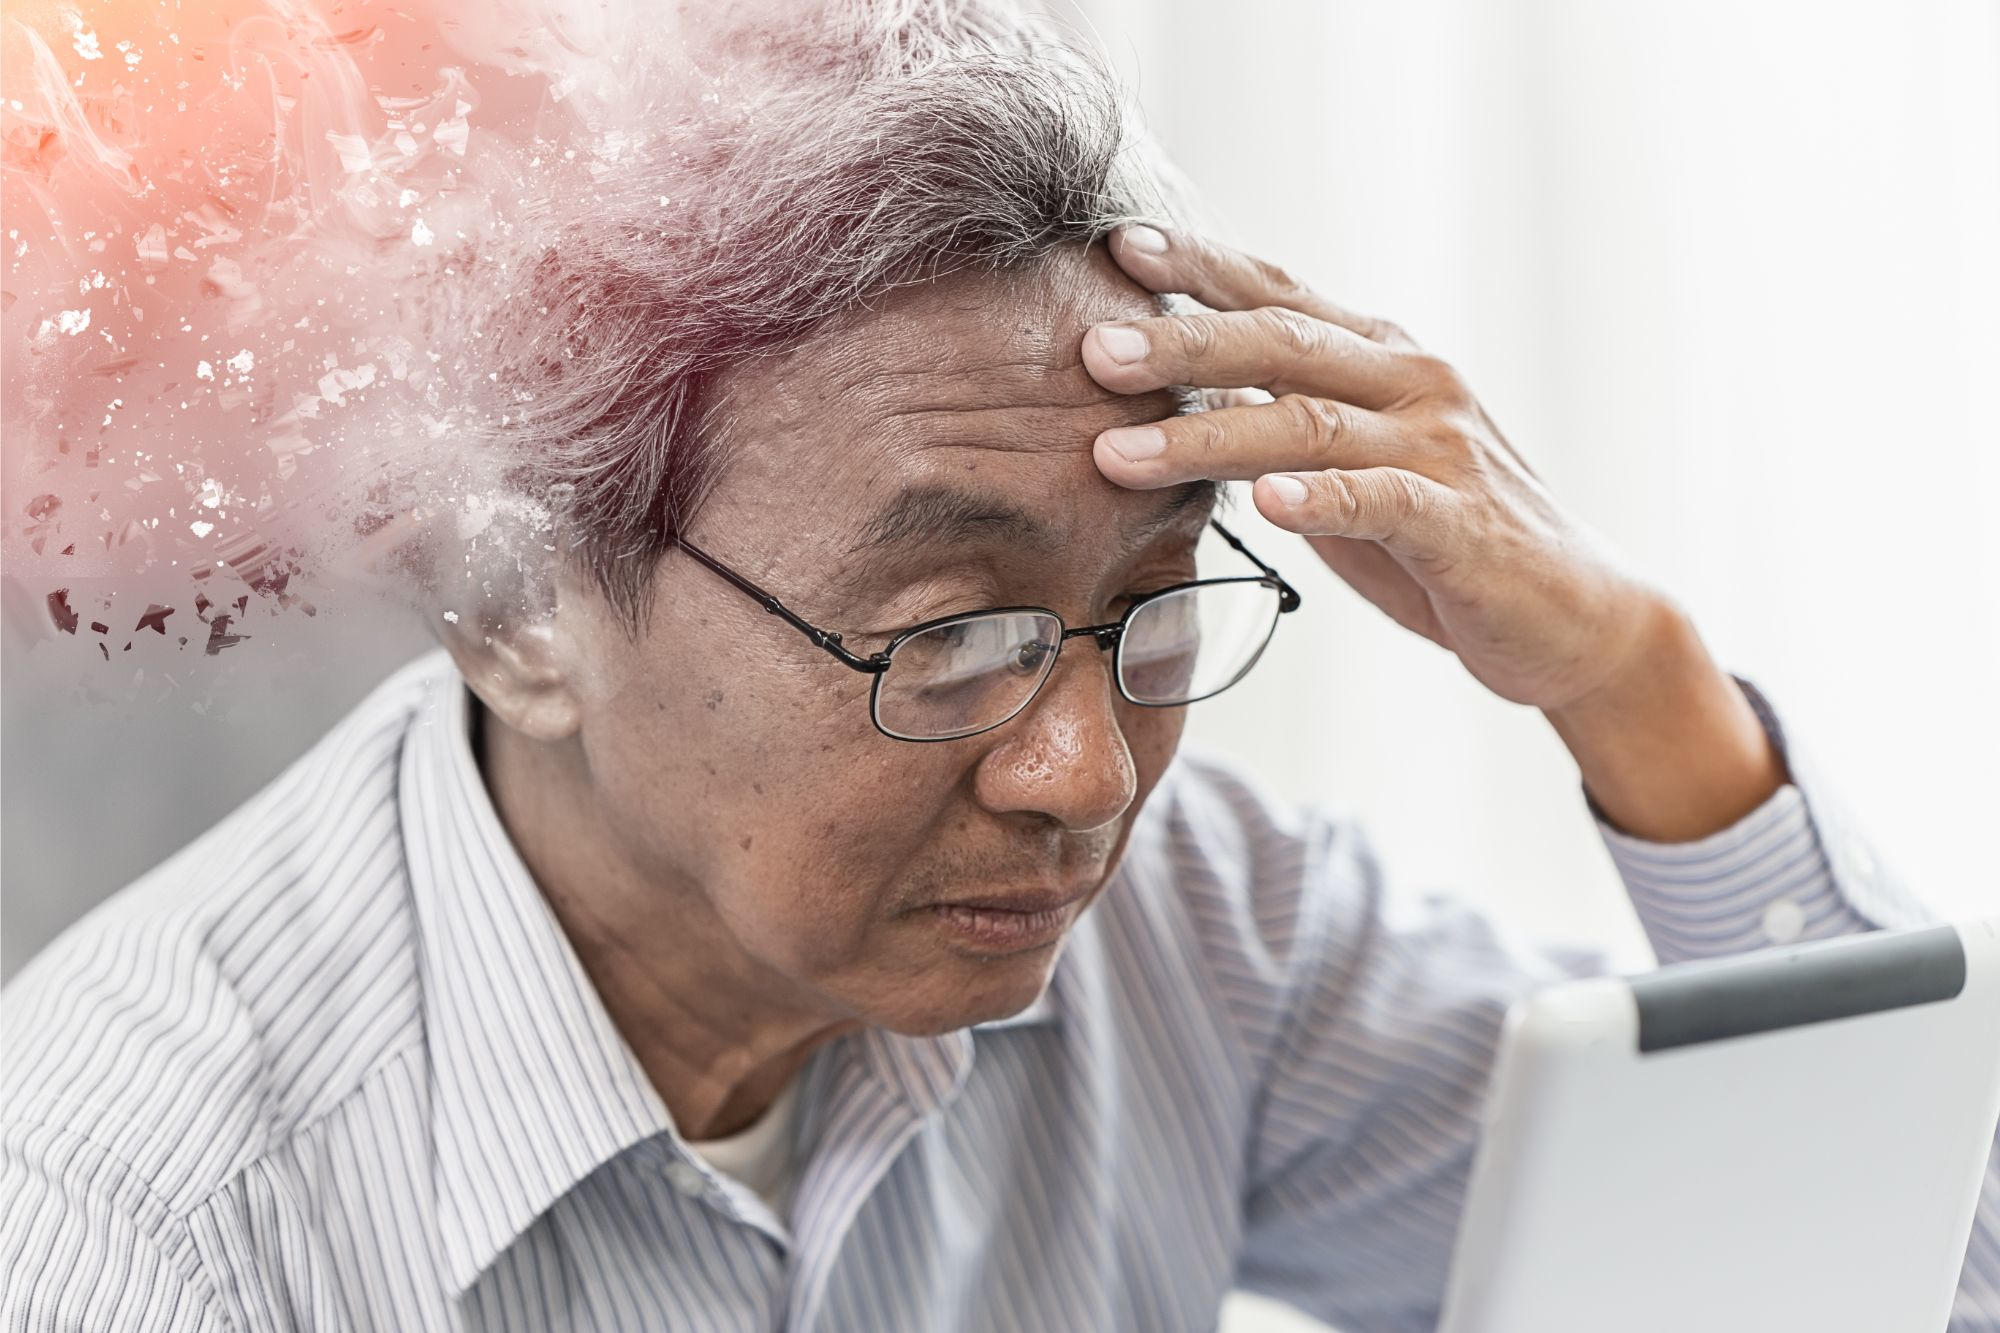 new-study-people-with-alzheimer-s-disease-perceive-pain-differently